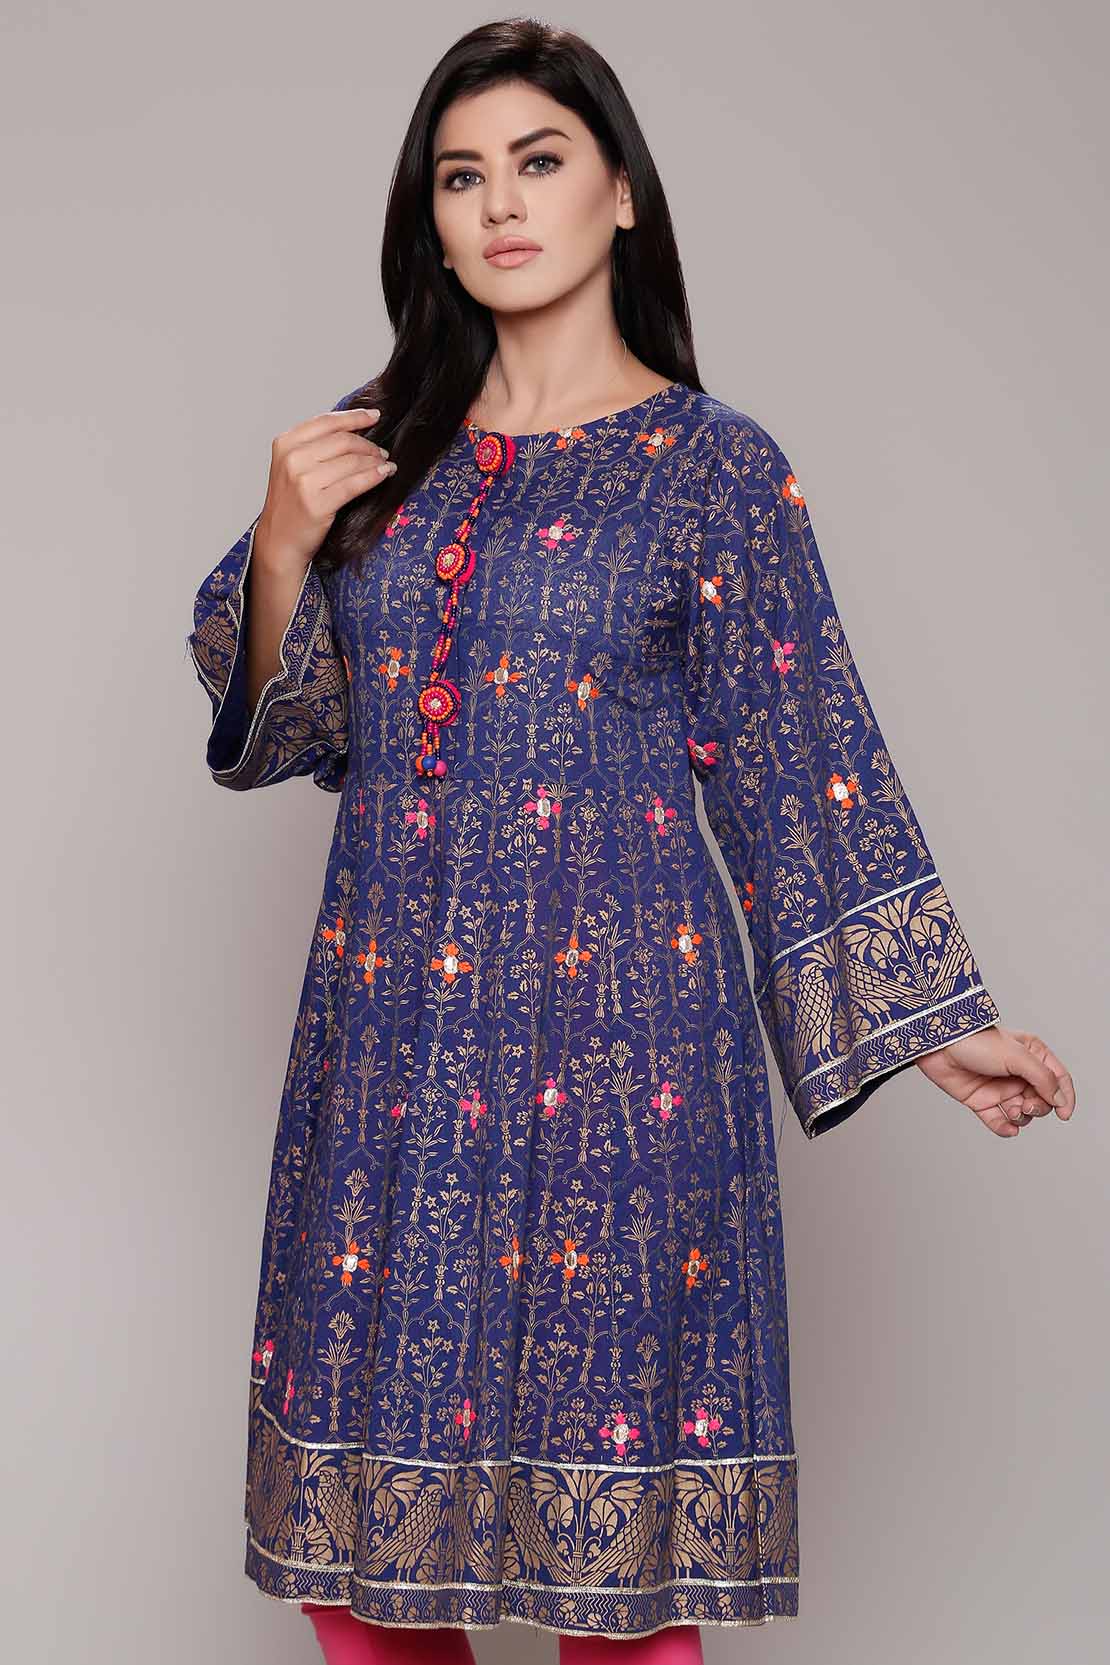 Mughal chatta blue pret wear top by Rang ja pret wear collection 2018 ...